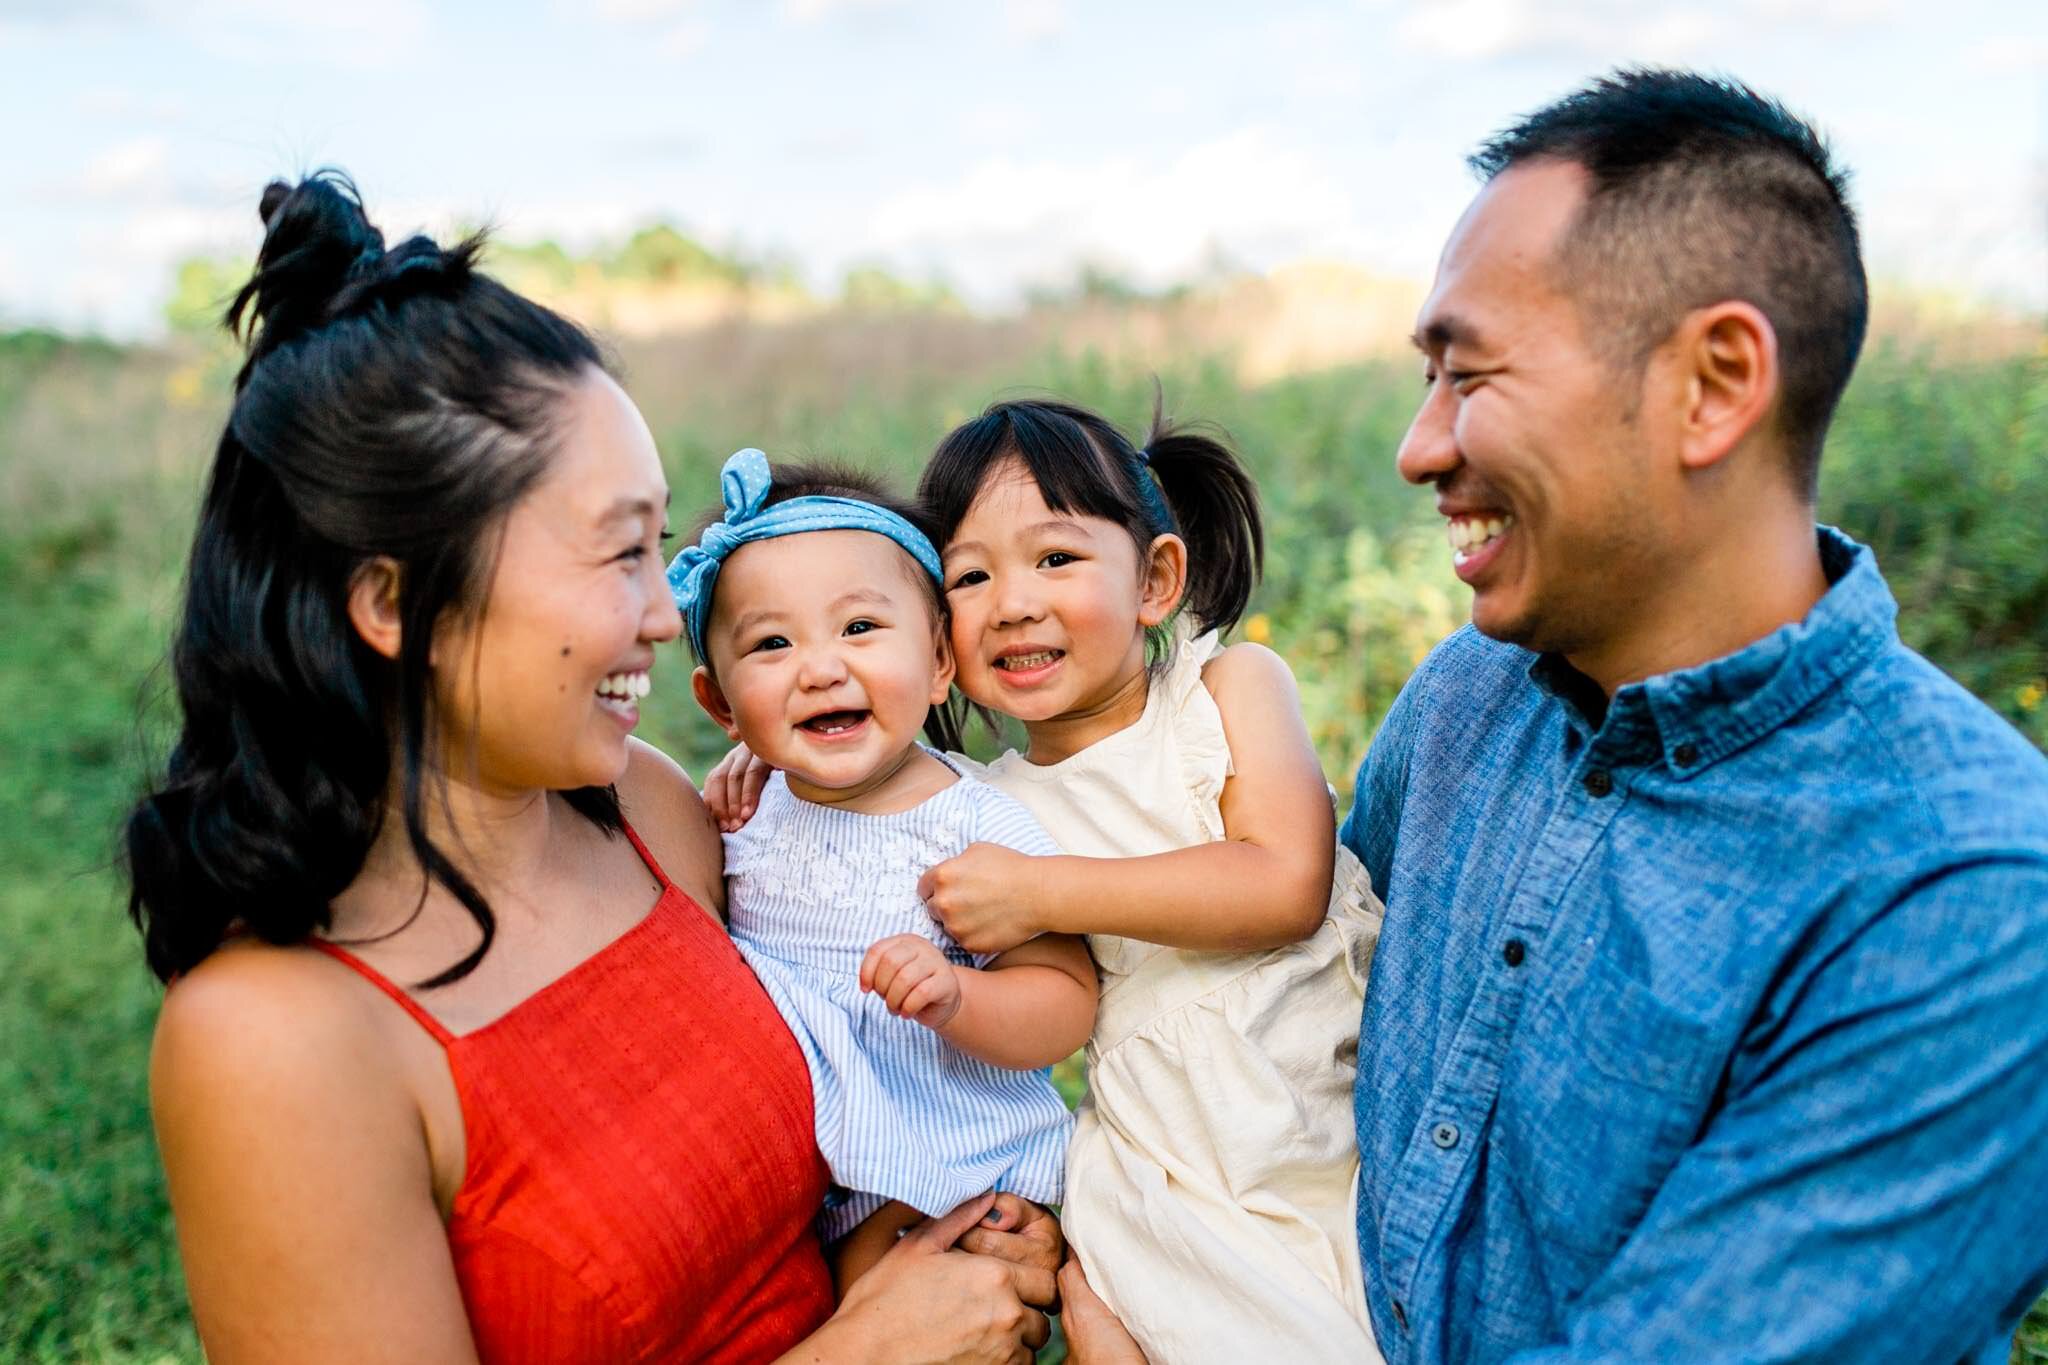 Raleigh Family Photographer | By G. Lin Photography | Candid shot of family laughing